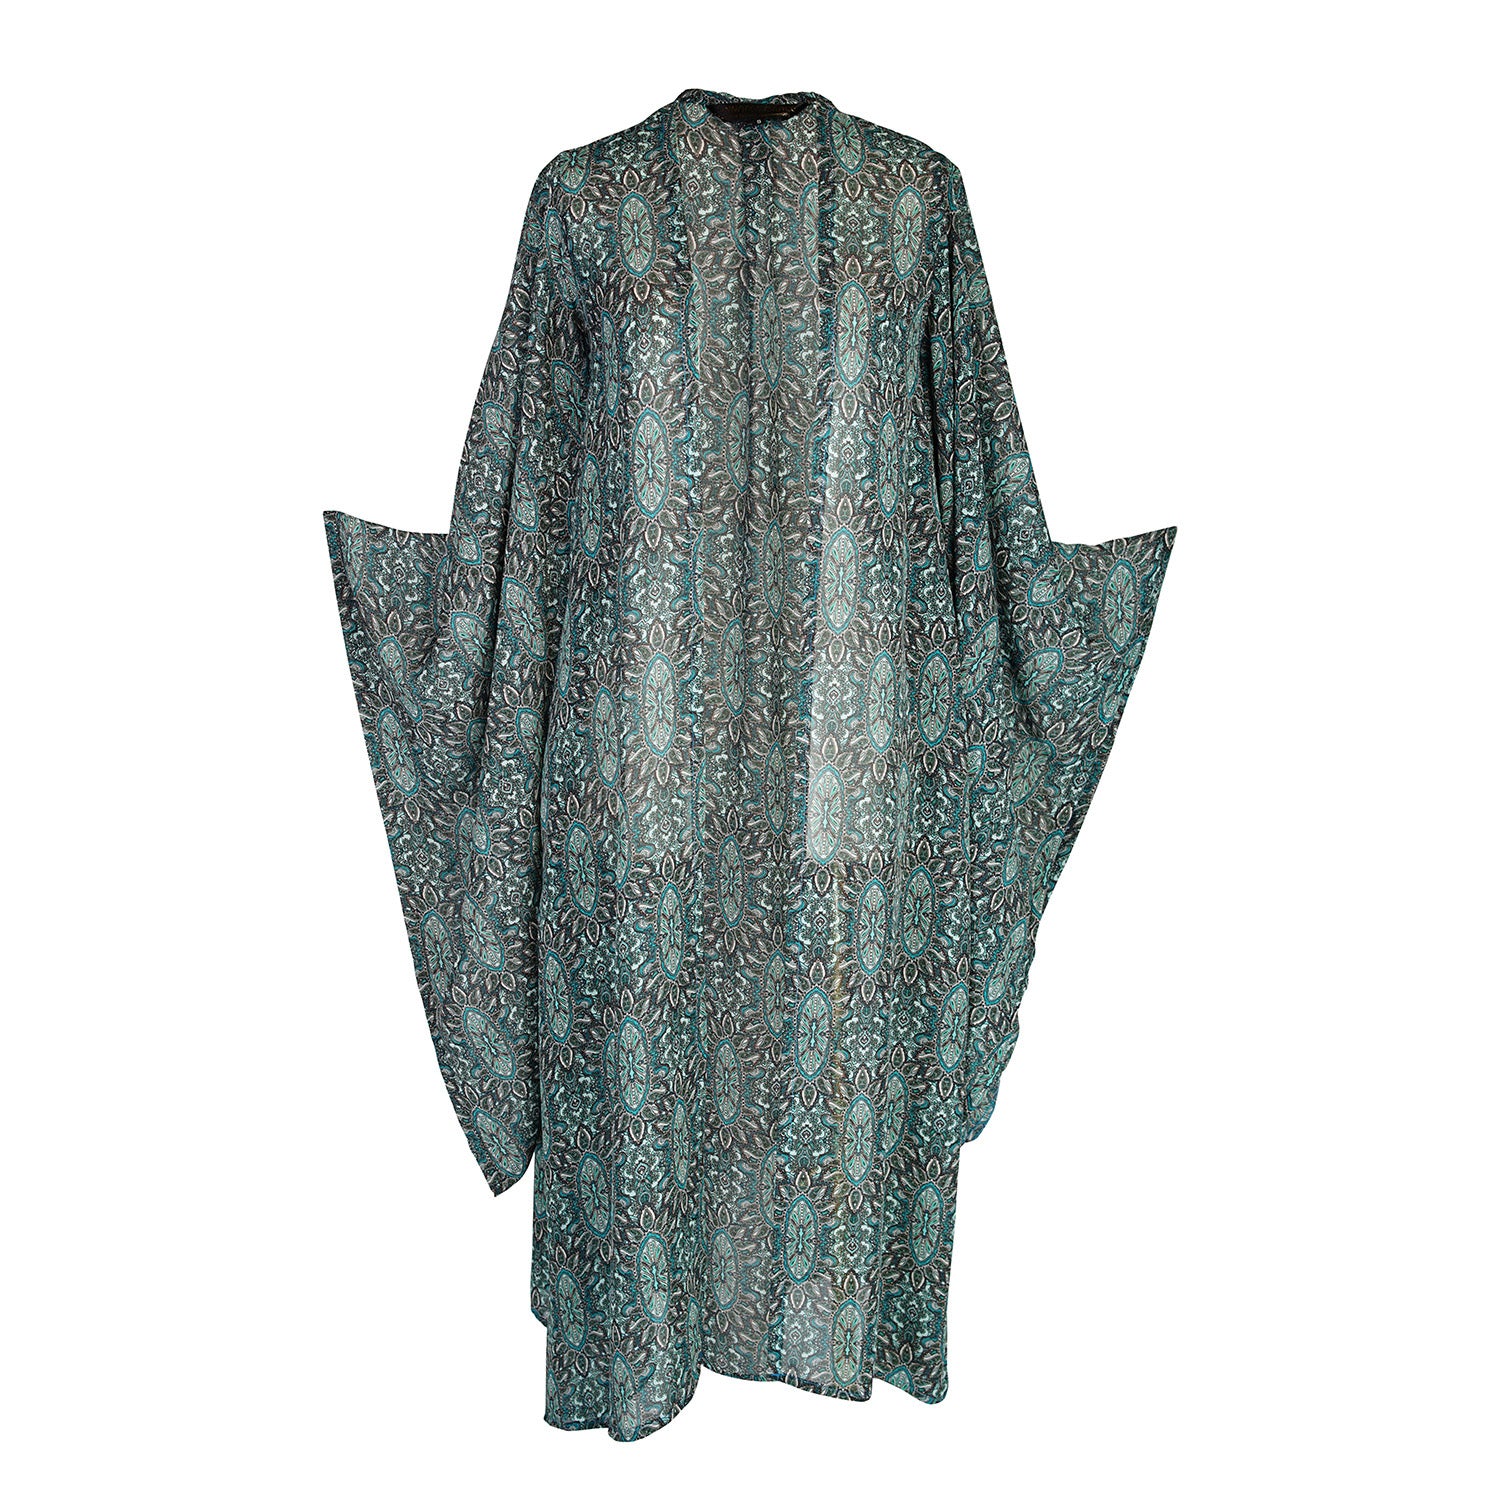 Turquoise tile print, floaty, ethereal, kimono with belt. Made from turquoise printed chiffon, its tile print is reminiscent of jewelry. Can be worn open as a robe or wrap dress. Long flowy sleeves with ankle hem.